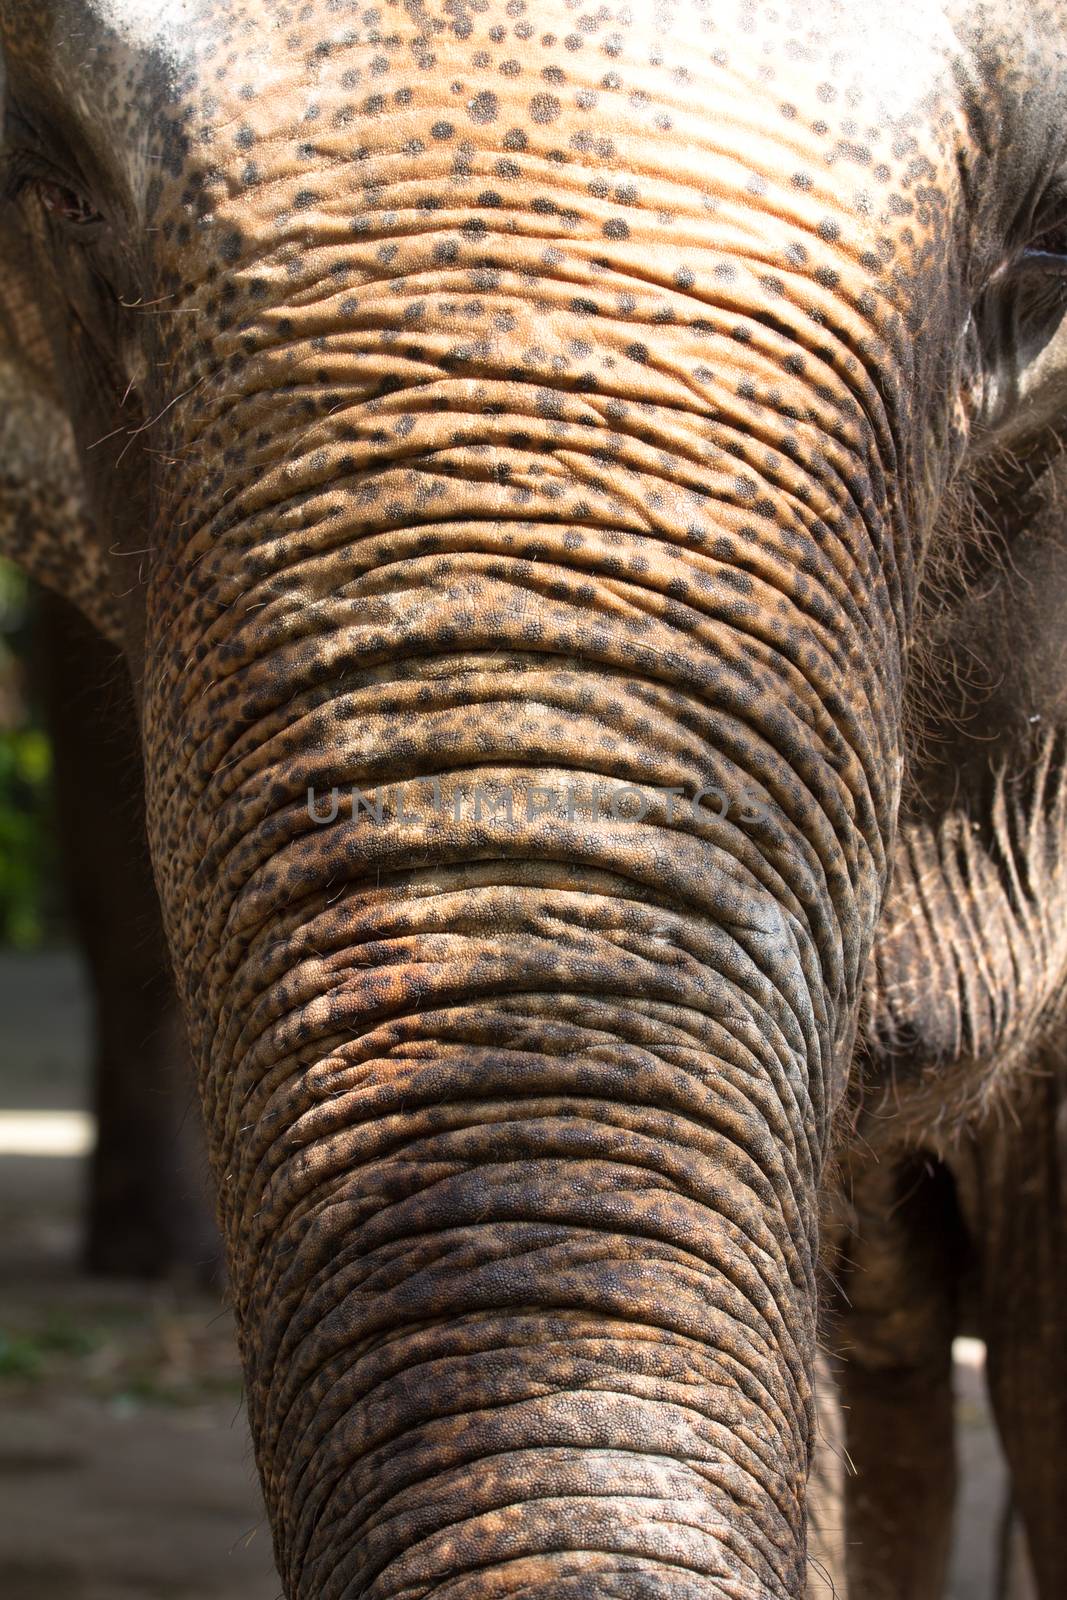 close-up of an Elephant head and trunk